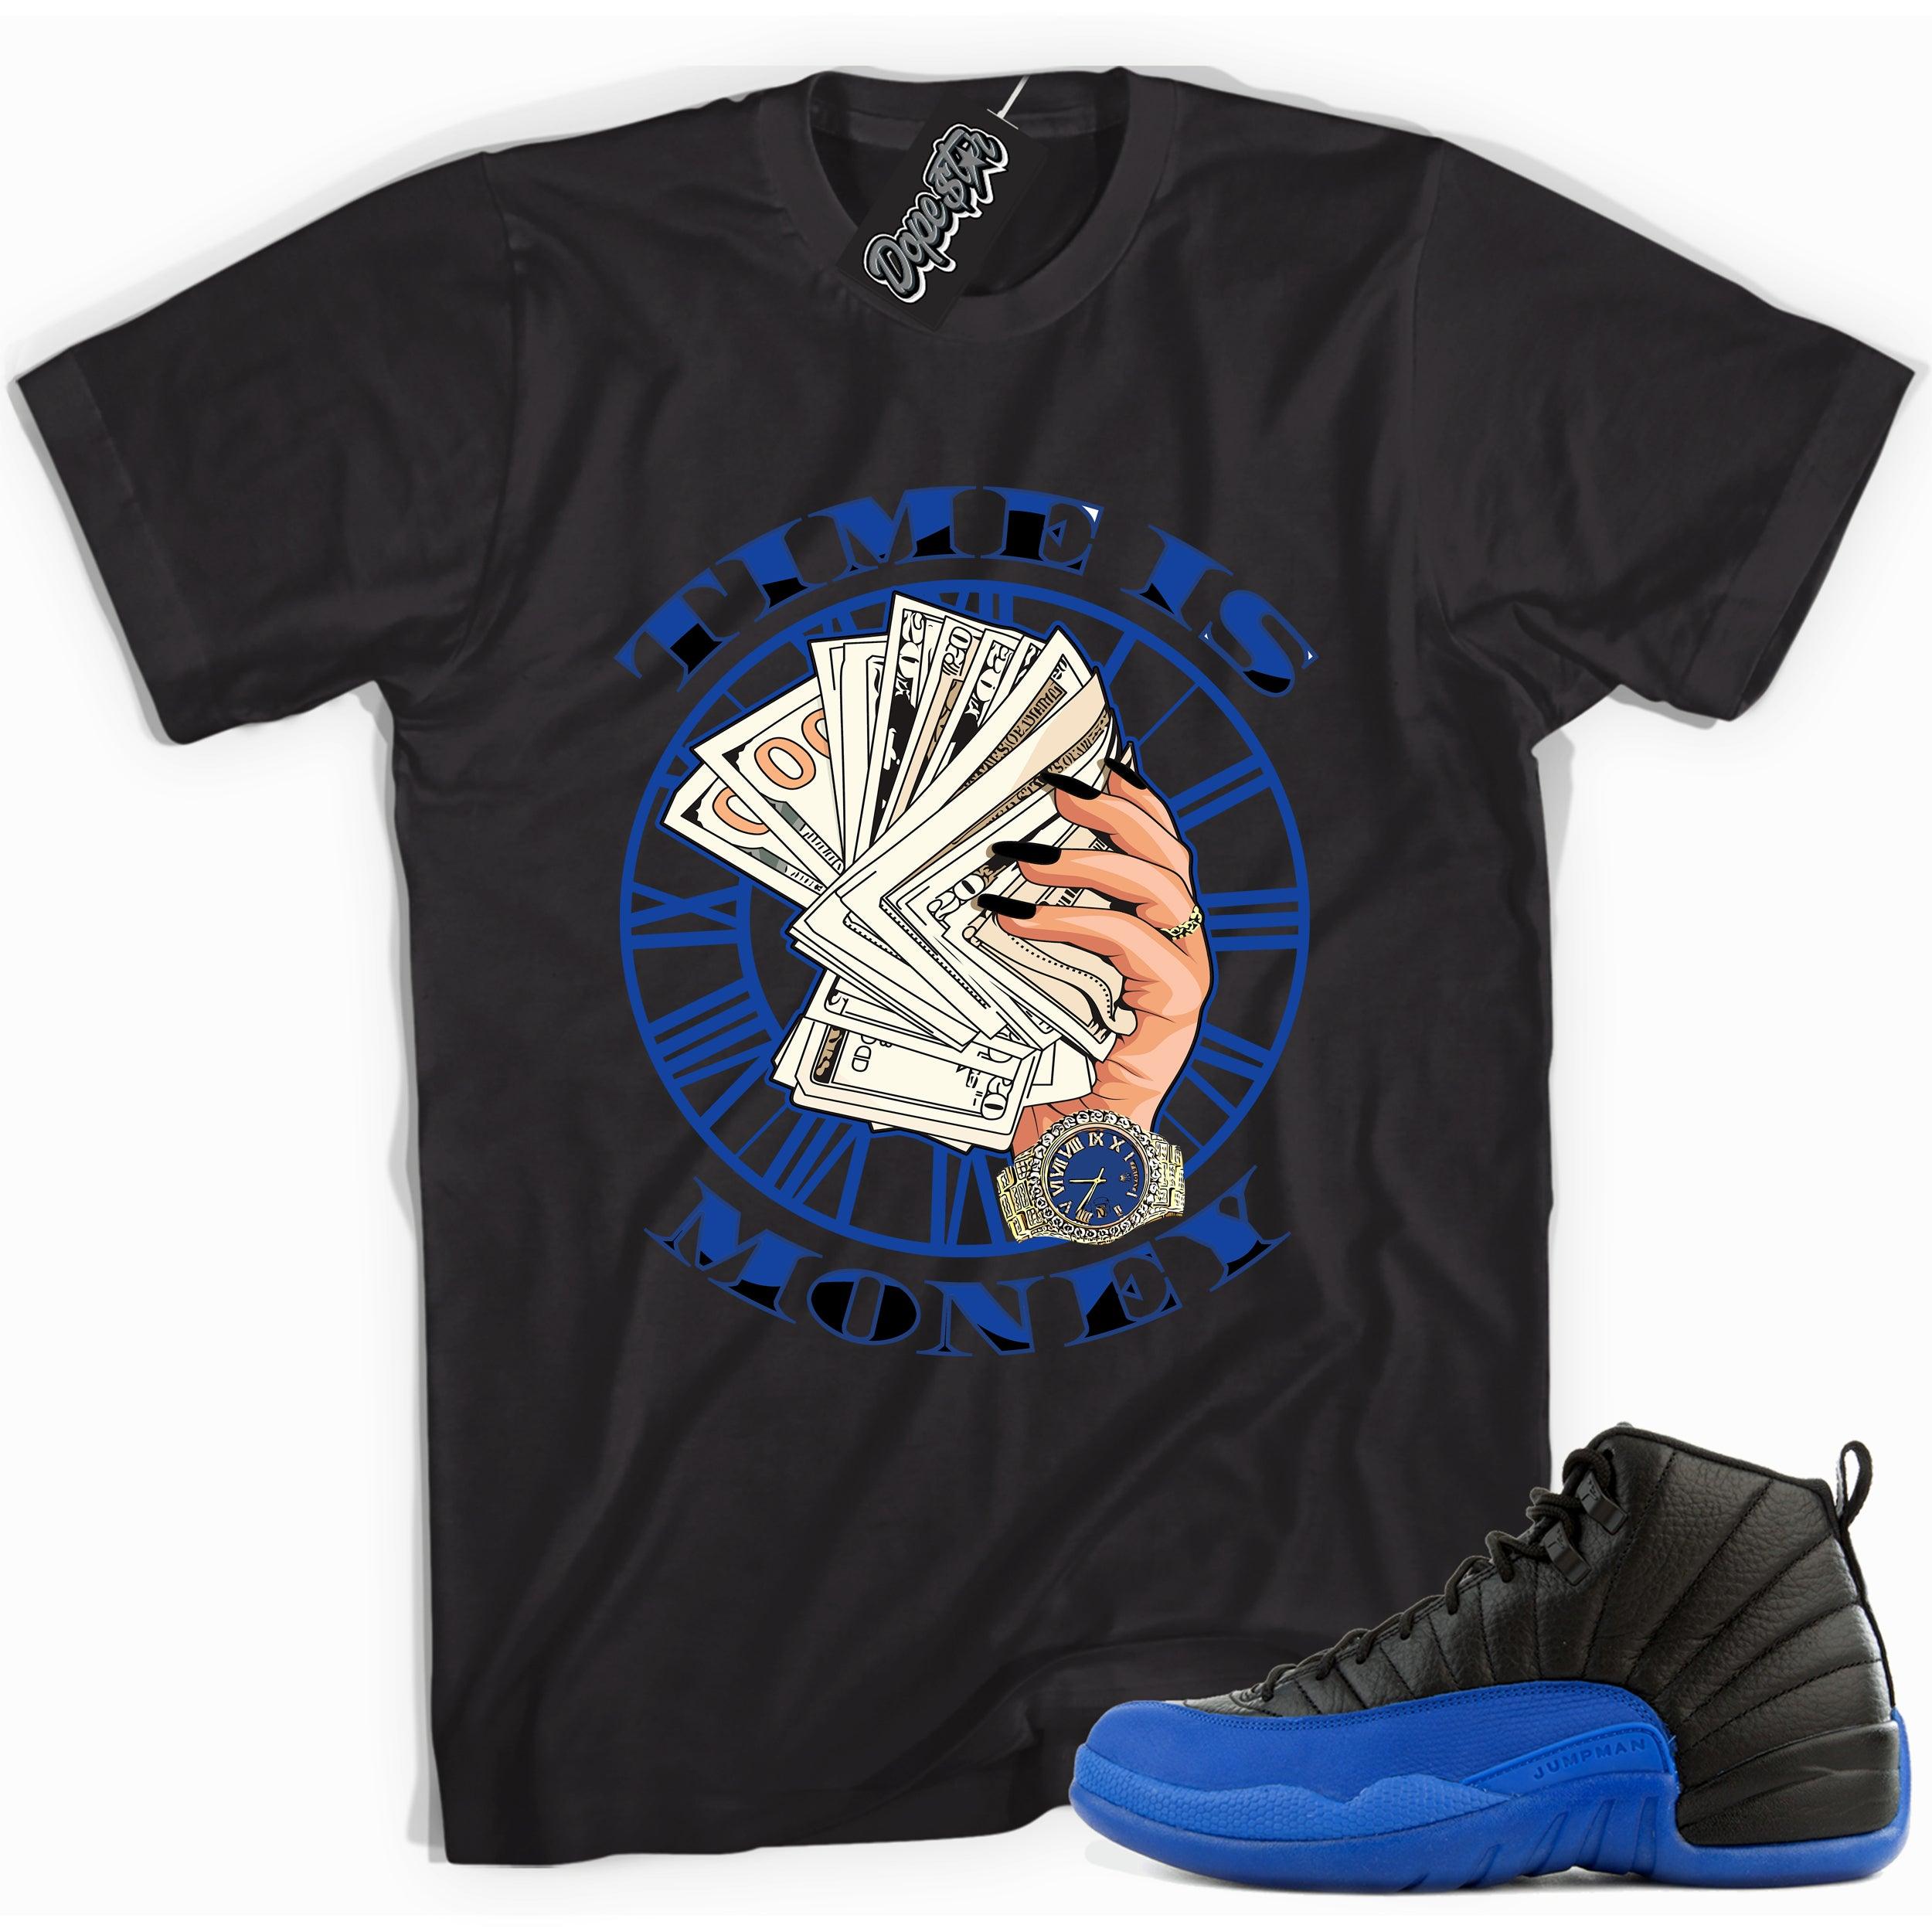 Cool black graphic tee with 'time is money' print, that perfectly matches  Air Jordan 12 Retro Black Game Royal sneakers.